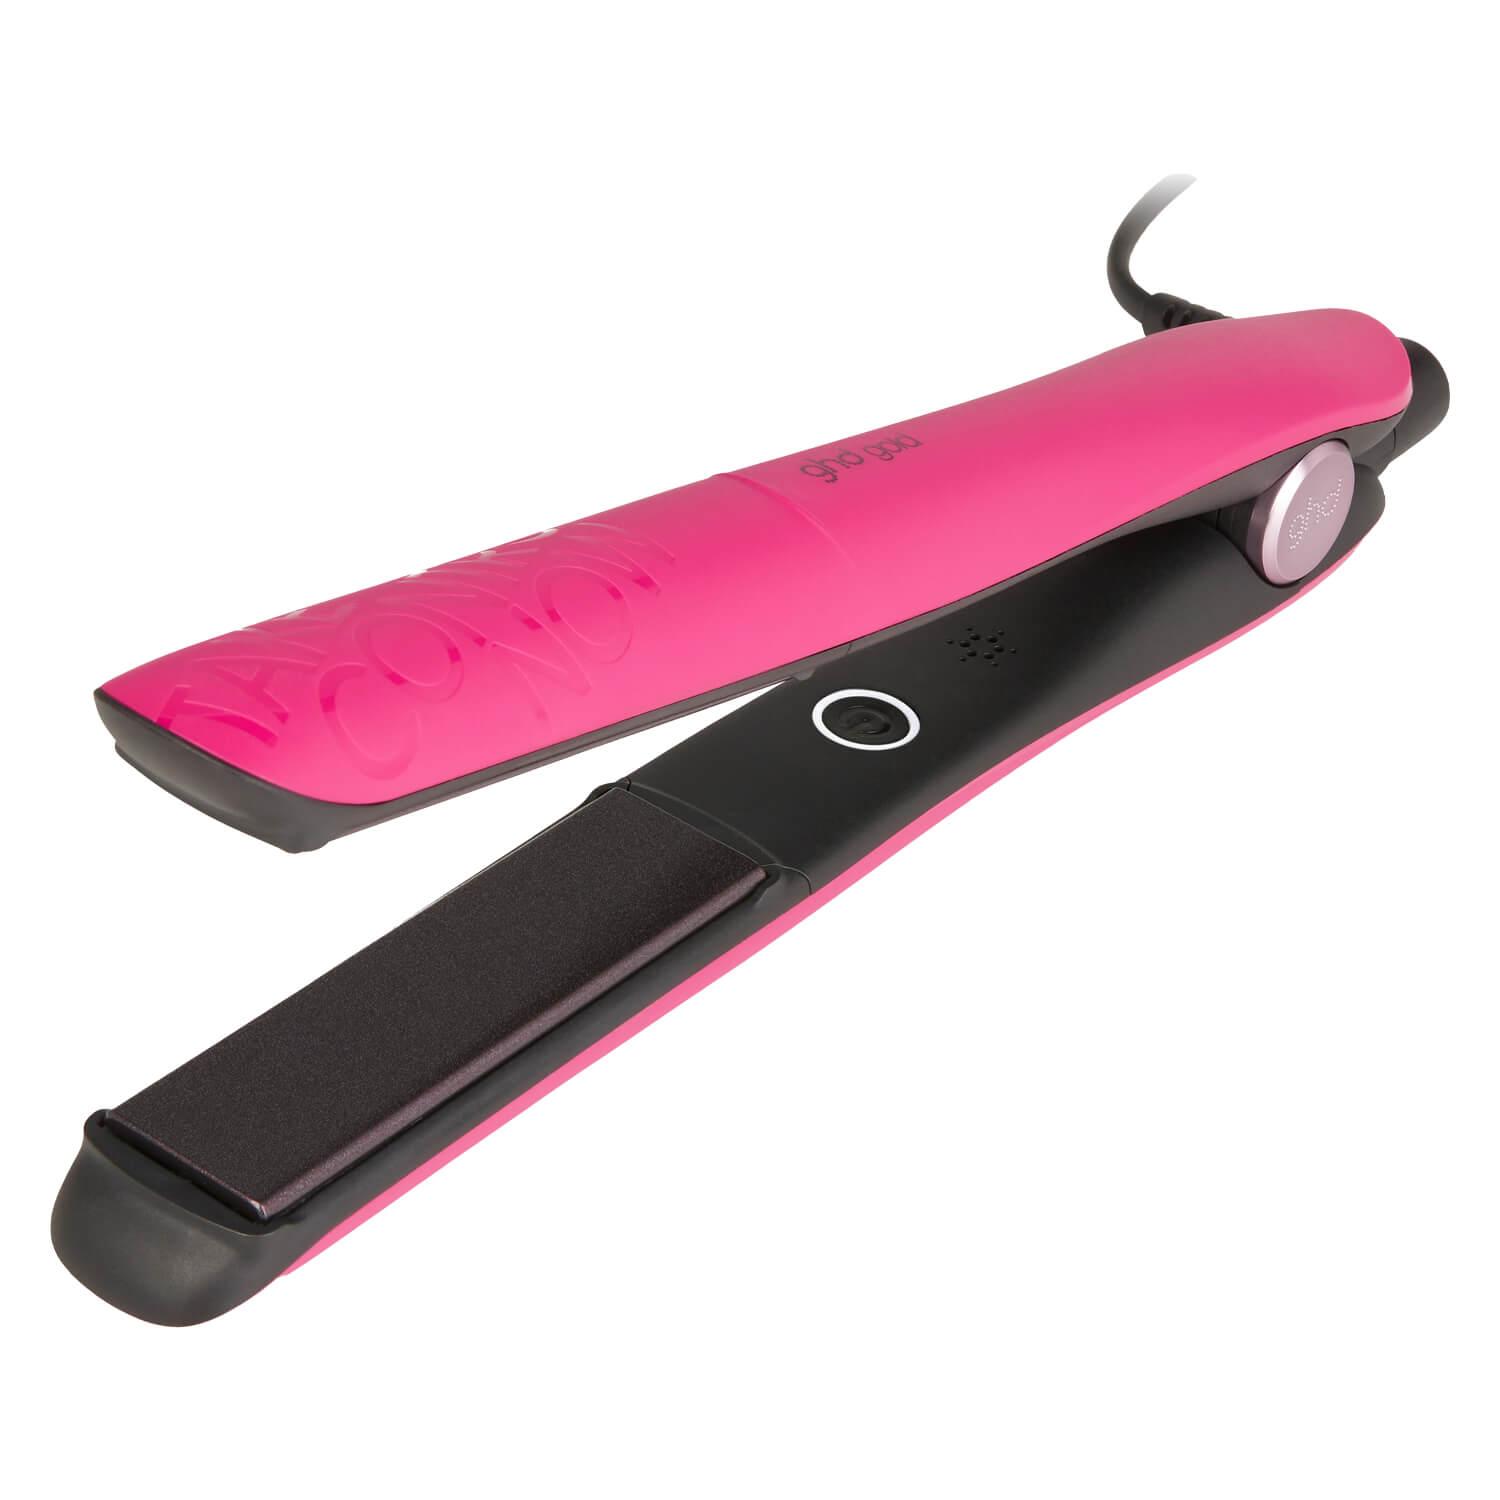 ghd tools - Take Control Now Gold Classic Styler Pink